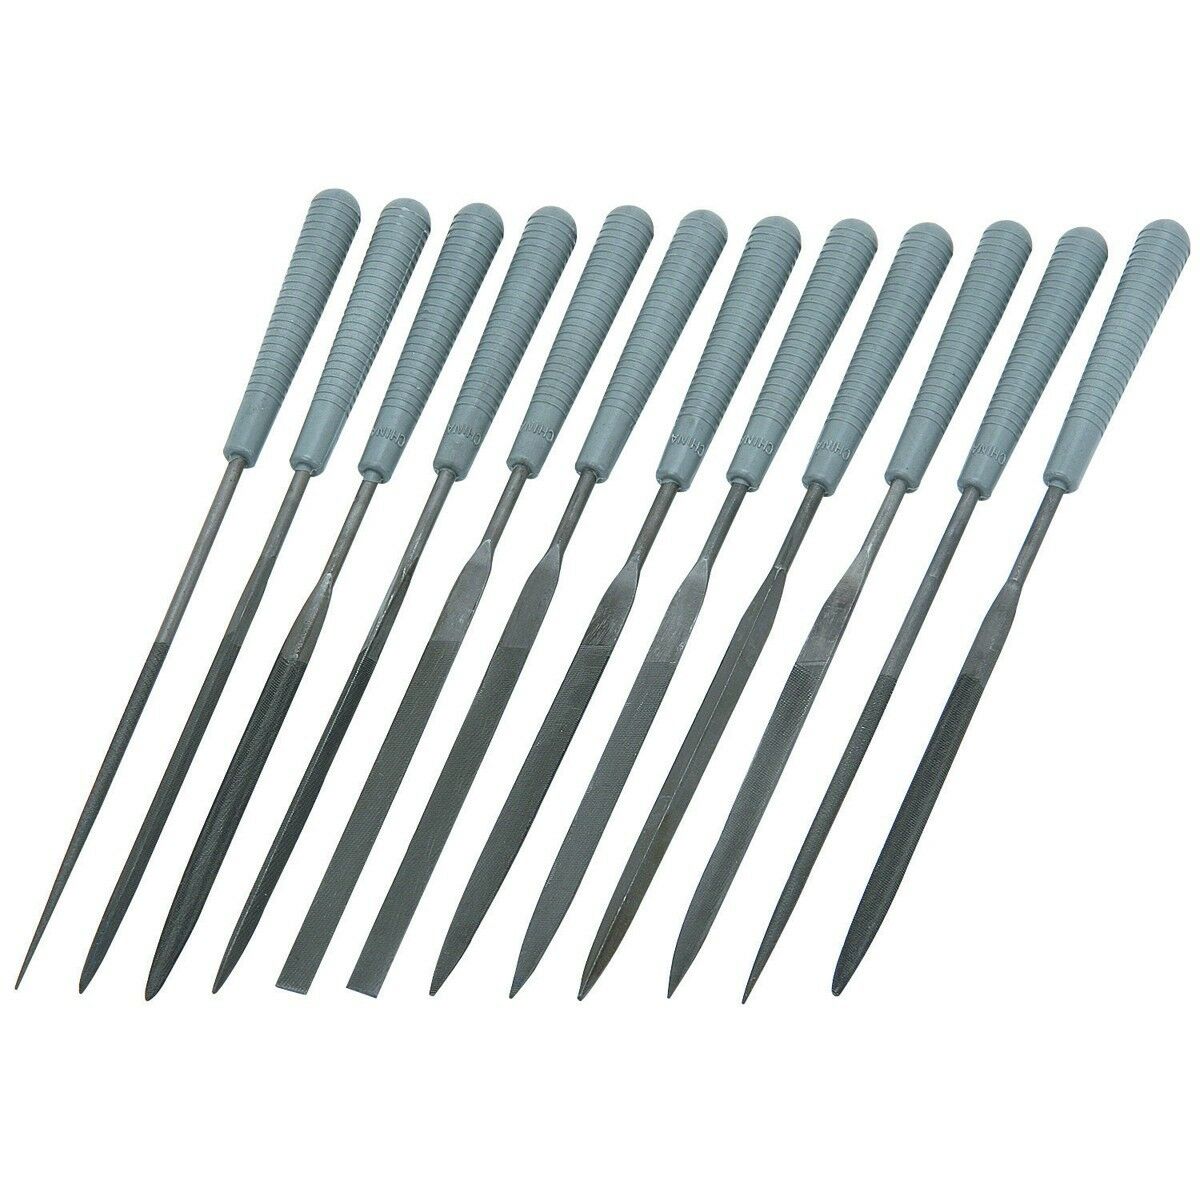 12 Piece Mini Smal Precision Needle File Set  Assorted Shaped Poly Handles